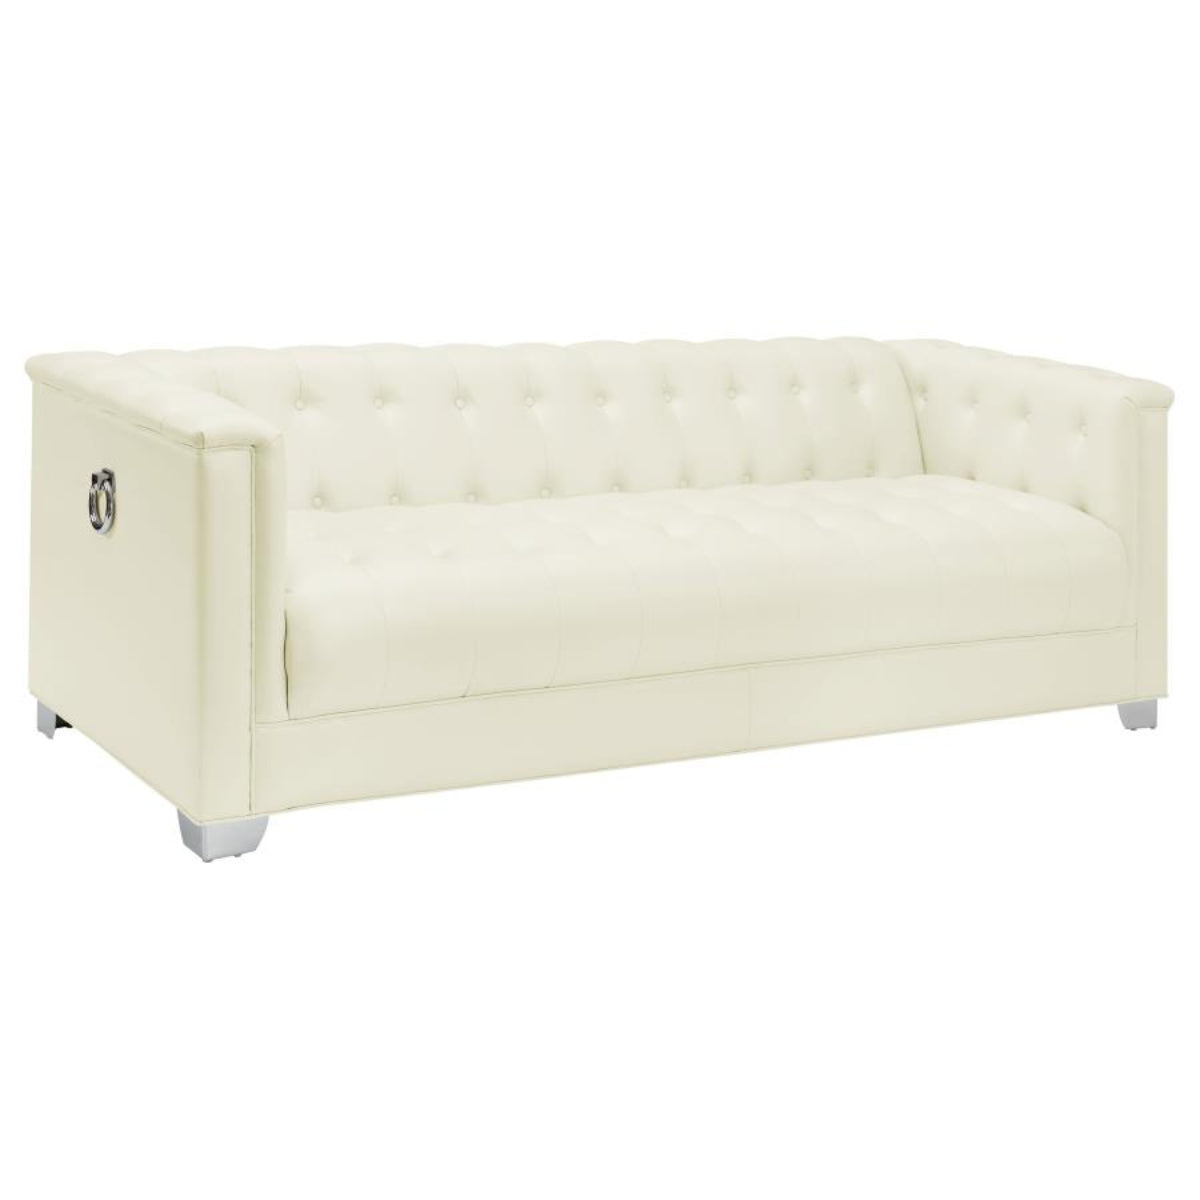 Tufted Sofa Set (2 pieces) Upholstered in Pearl White